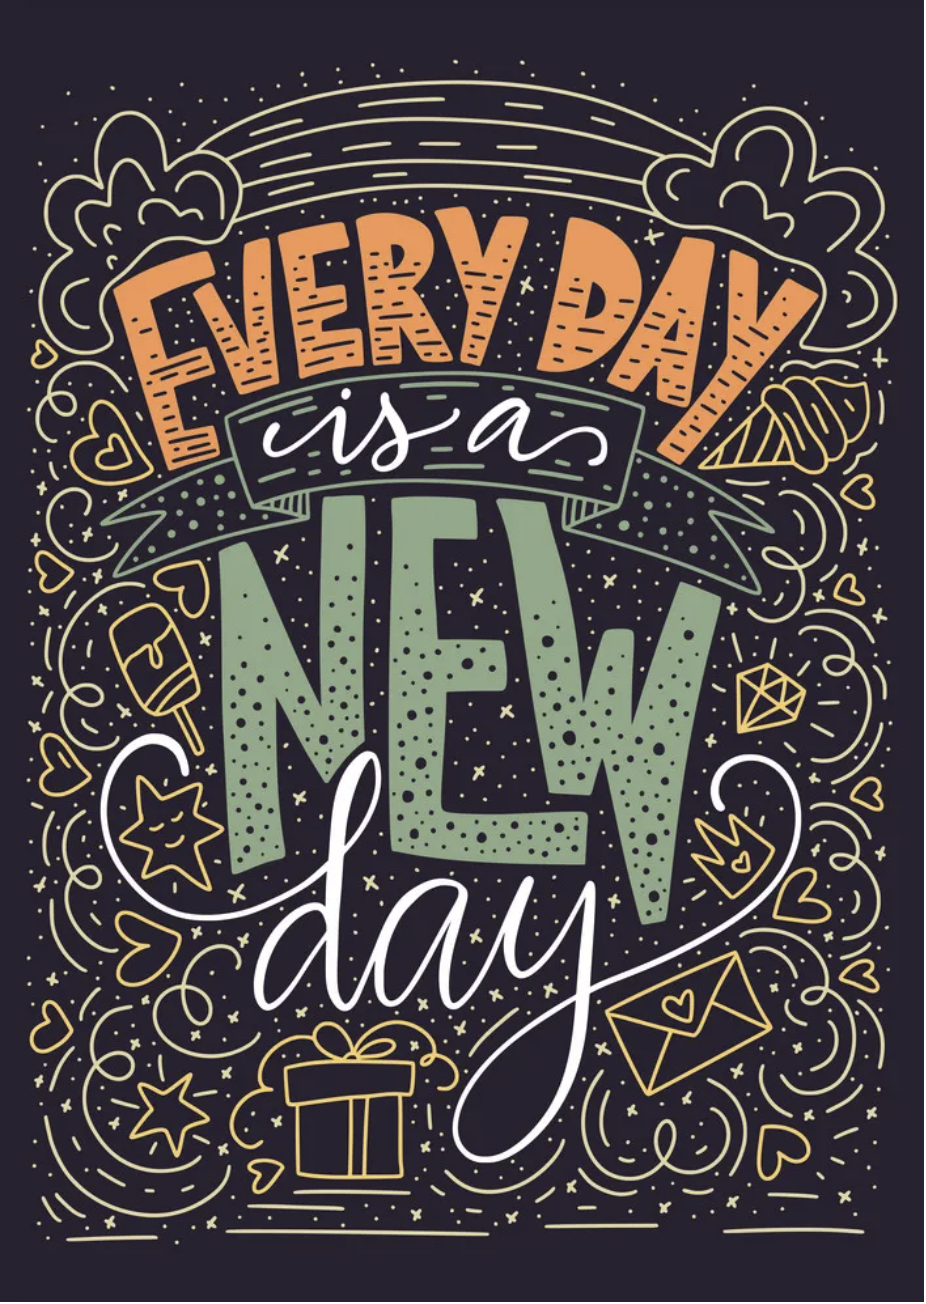 every day is a new day